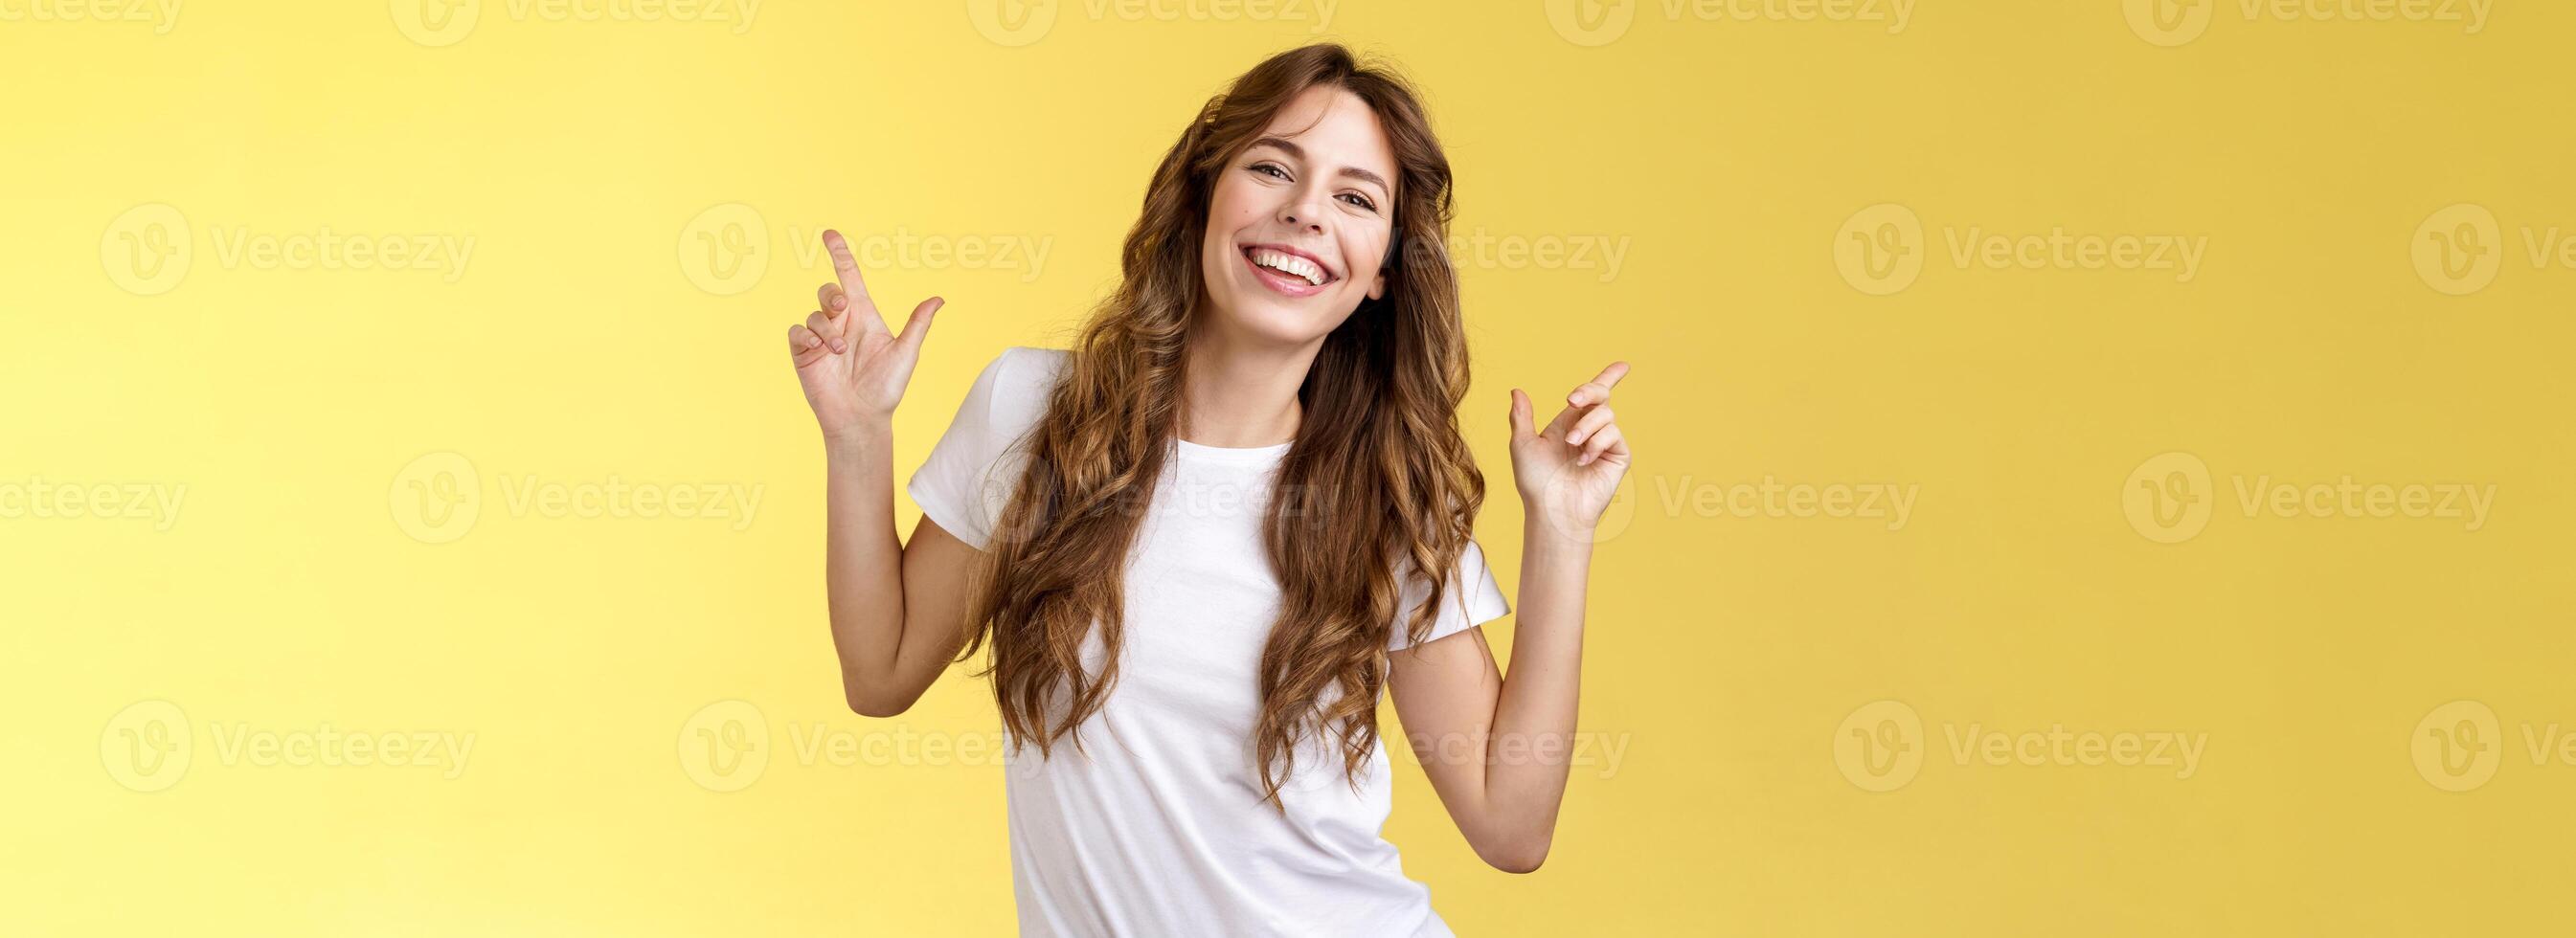 Outgoing cheerful attractive woman curly haircut wear casual white t-shirt dancing party having fun pointing up disco moves having fun smiling broadly enjoy holidays anticipating summer trip photo